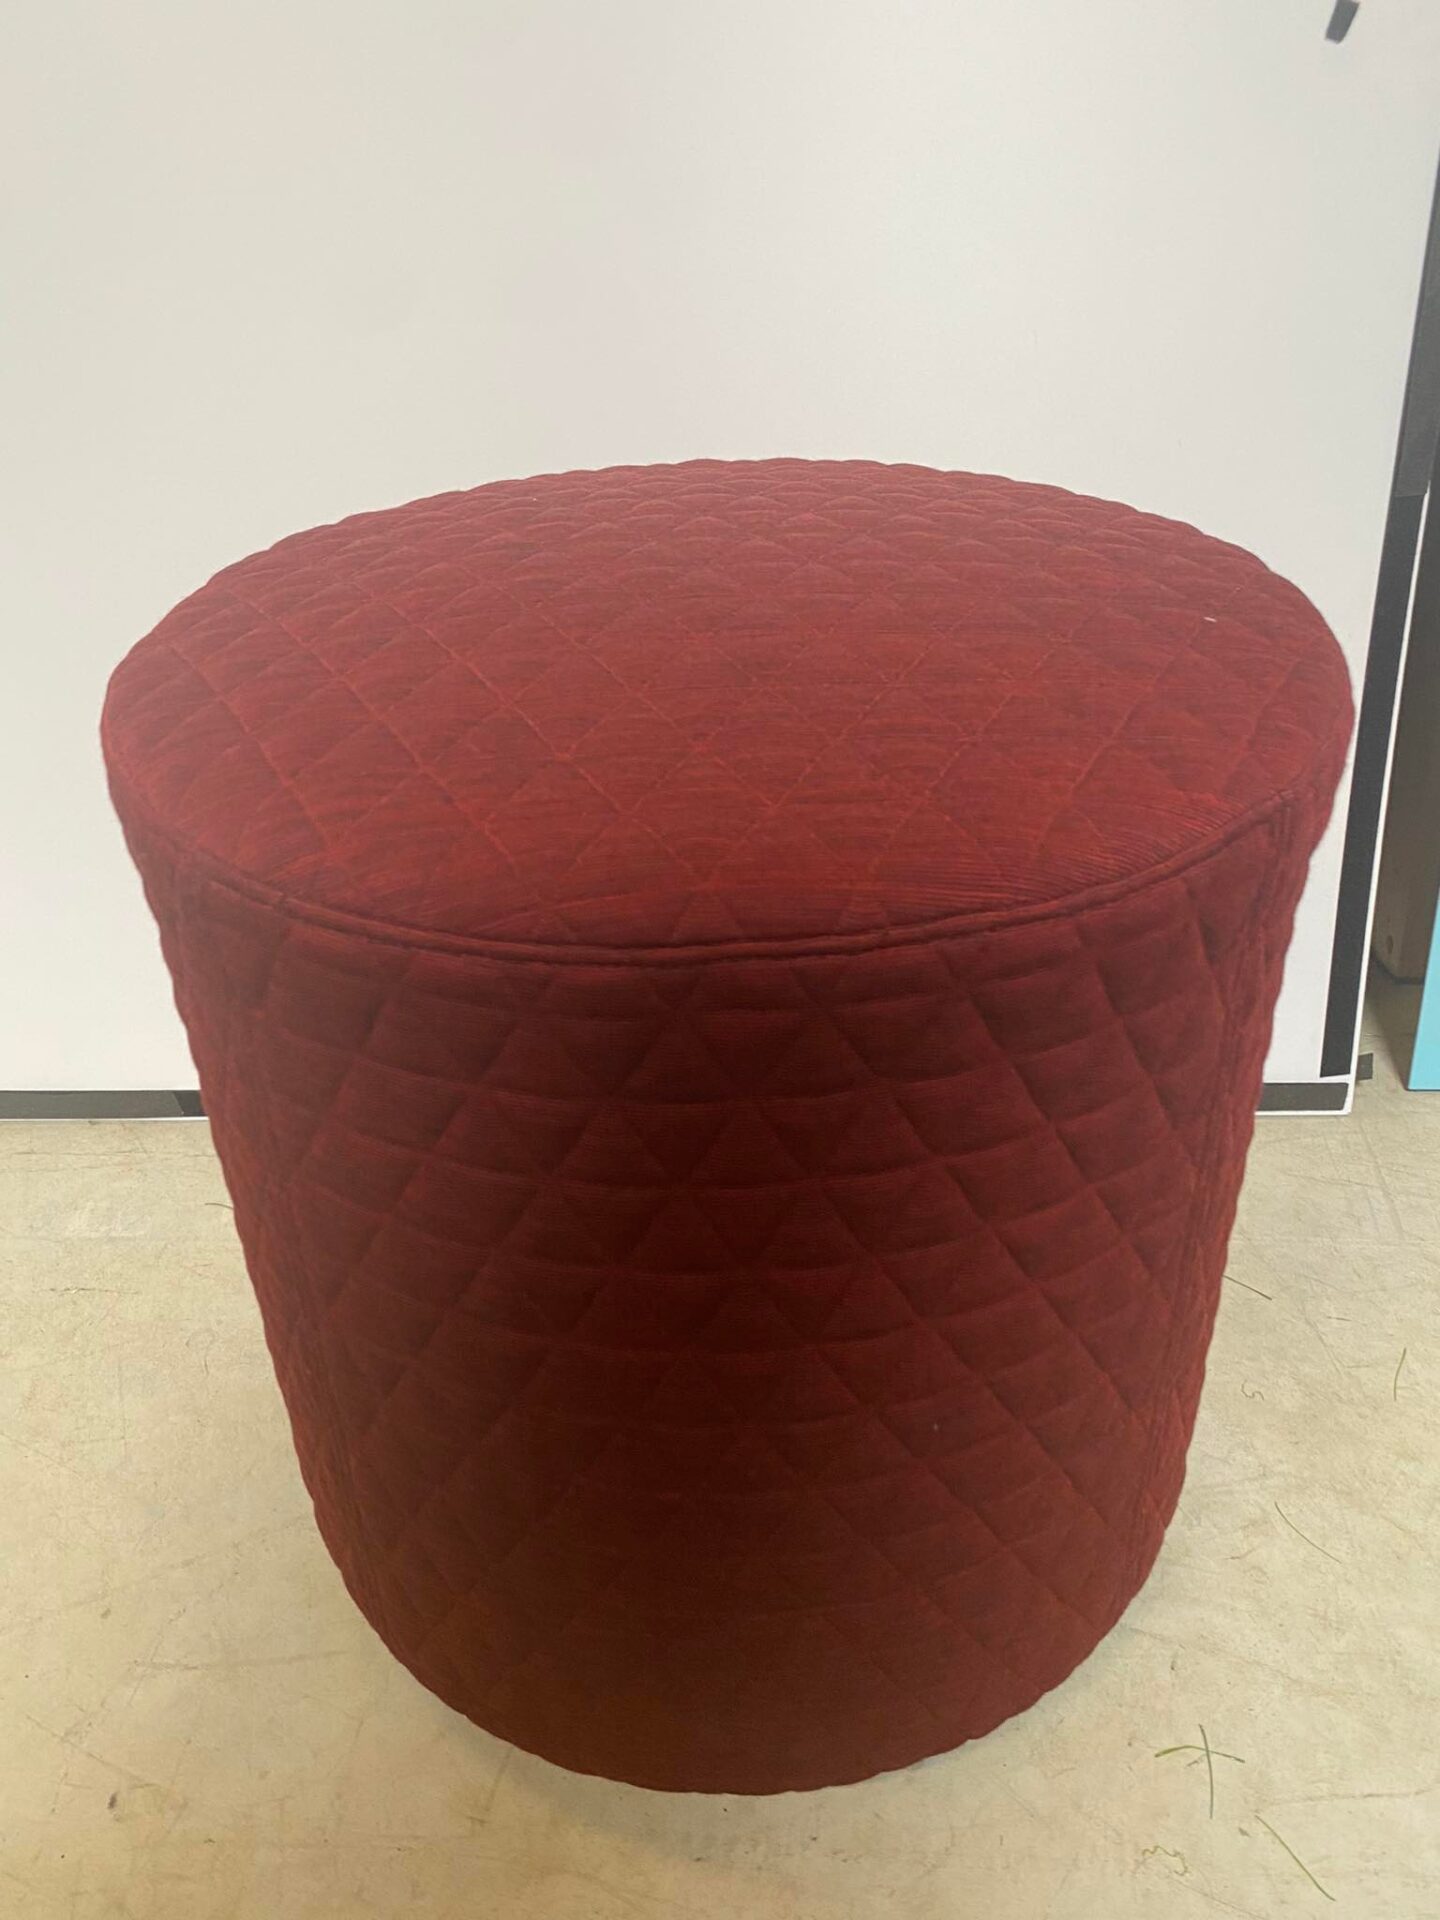 MOBITEC CHEESE POUF RED